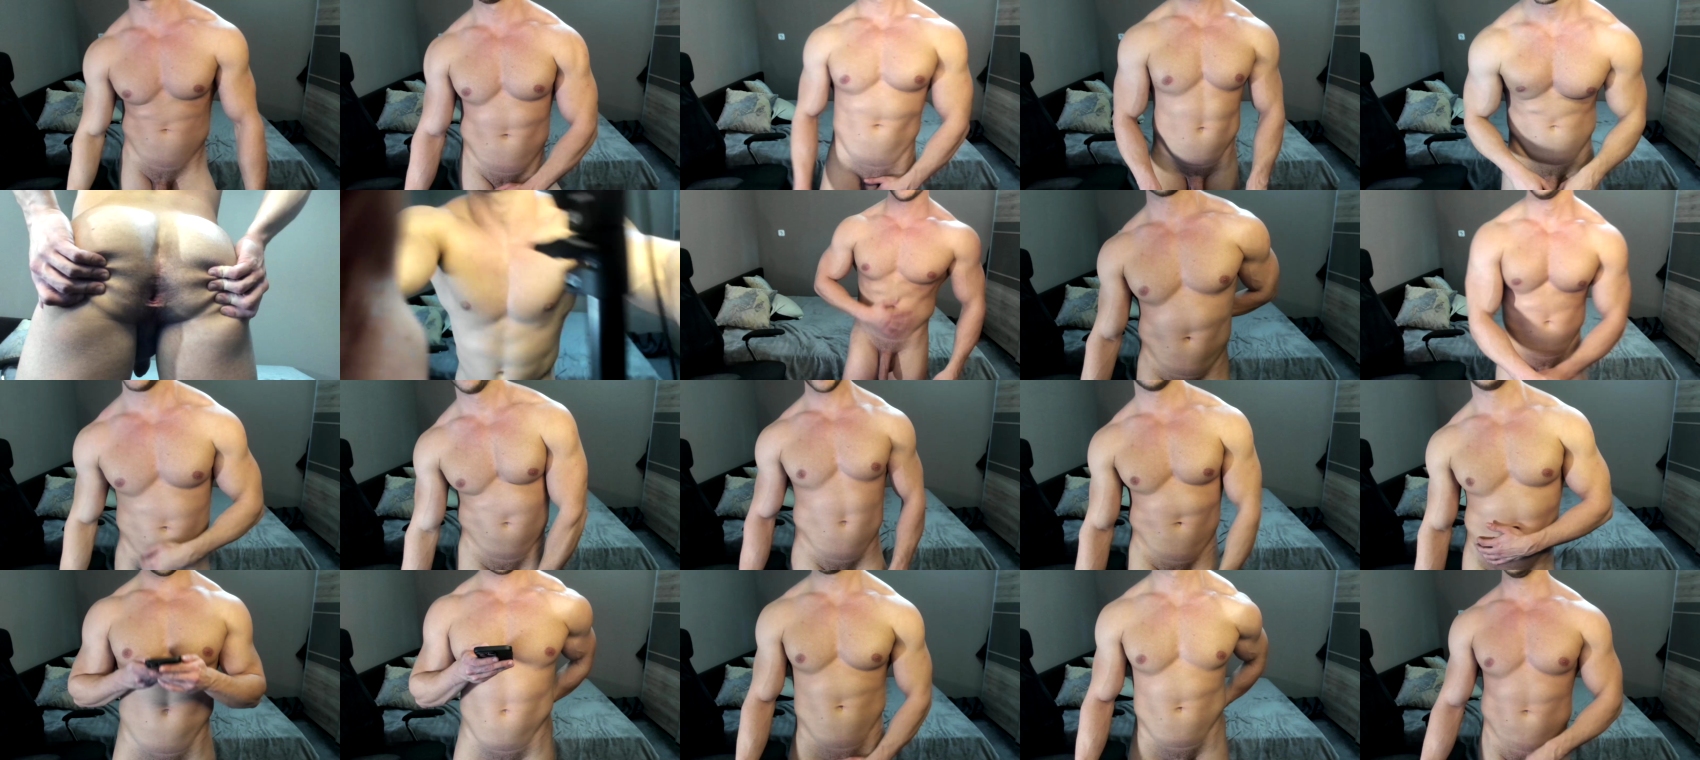 muscle955 Download CAM SHOW @ Chaturbate 27-12-2021